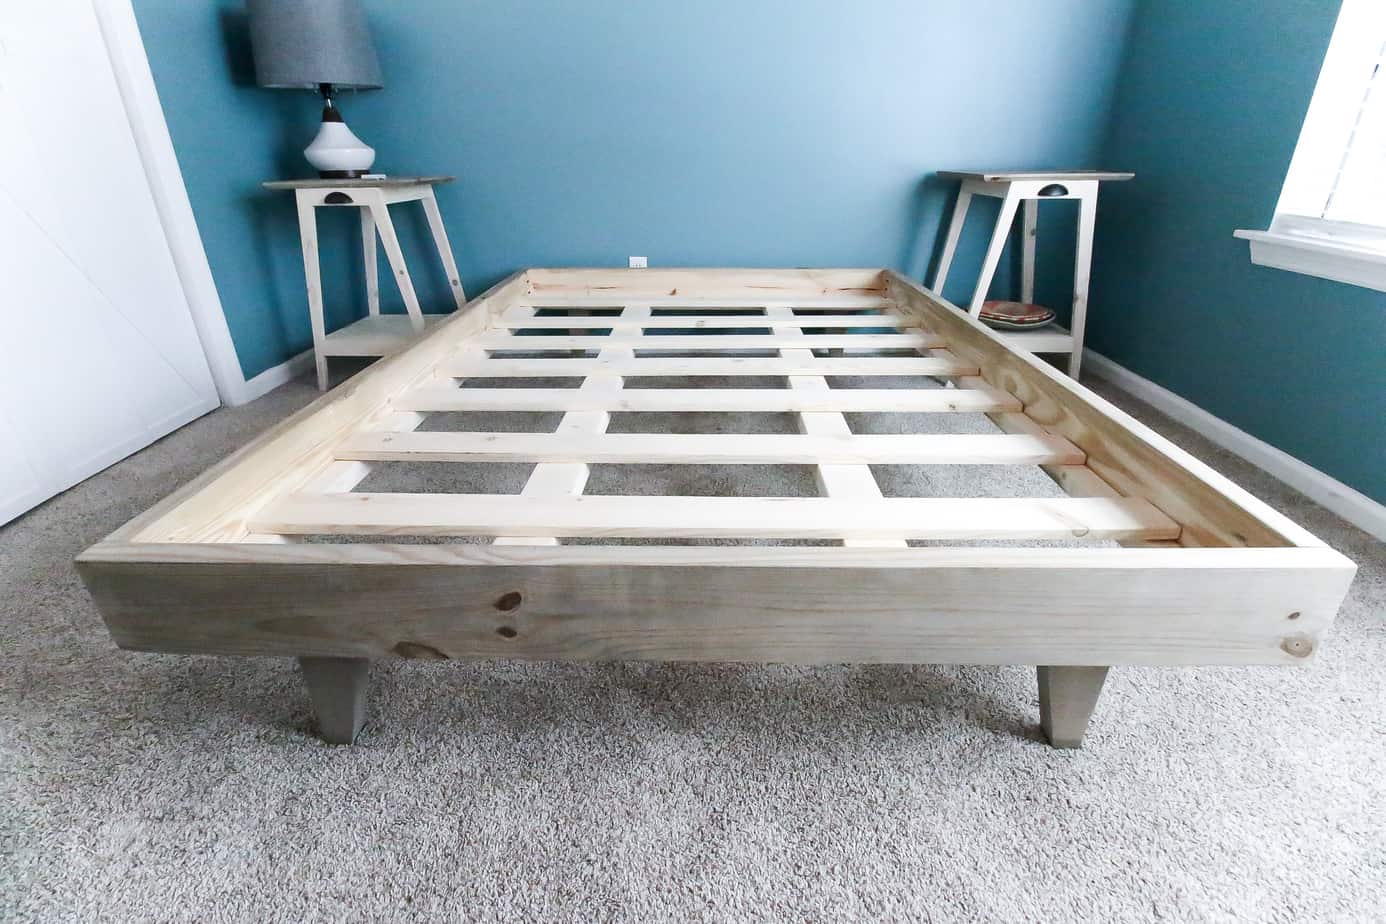 How To Build A Platform Bed For 50, How To Build A Platform Bed King Size